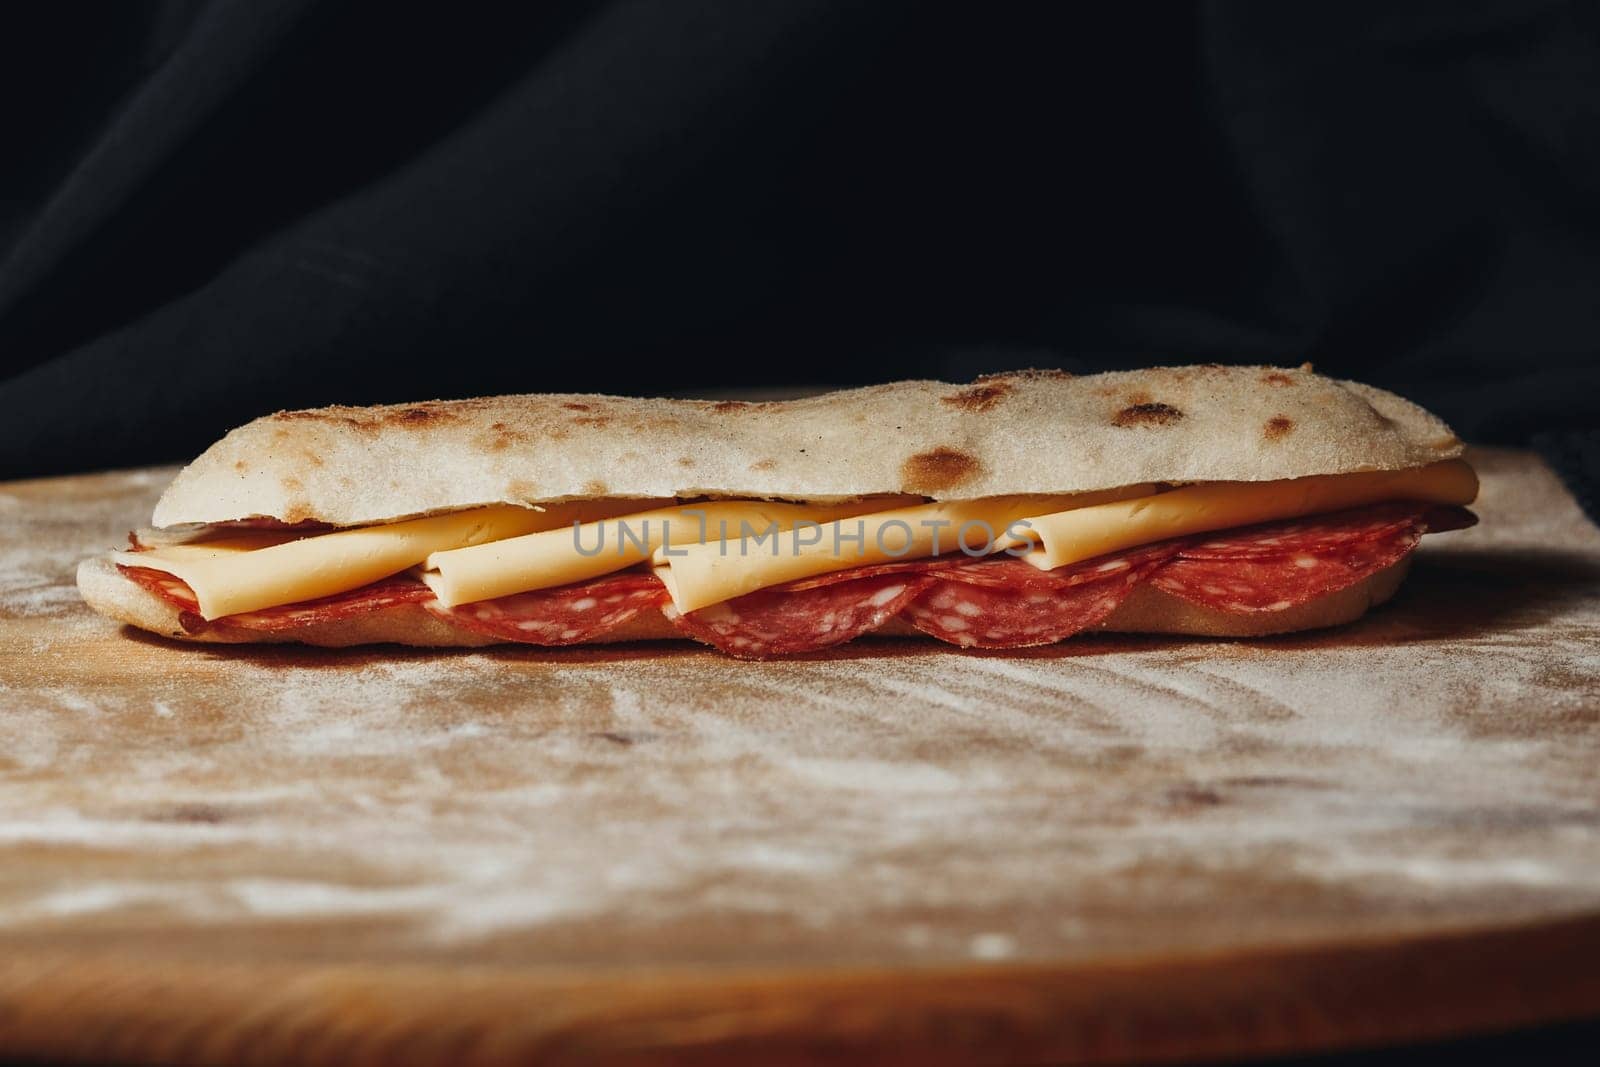 Artisanal Pepperoni andA close-up view of a freshly made pepperoni and cheese sandwich on rustic bread, resting on wood. Cheese Sandwich on a Wooden Cutting Board. High quality photo